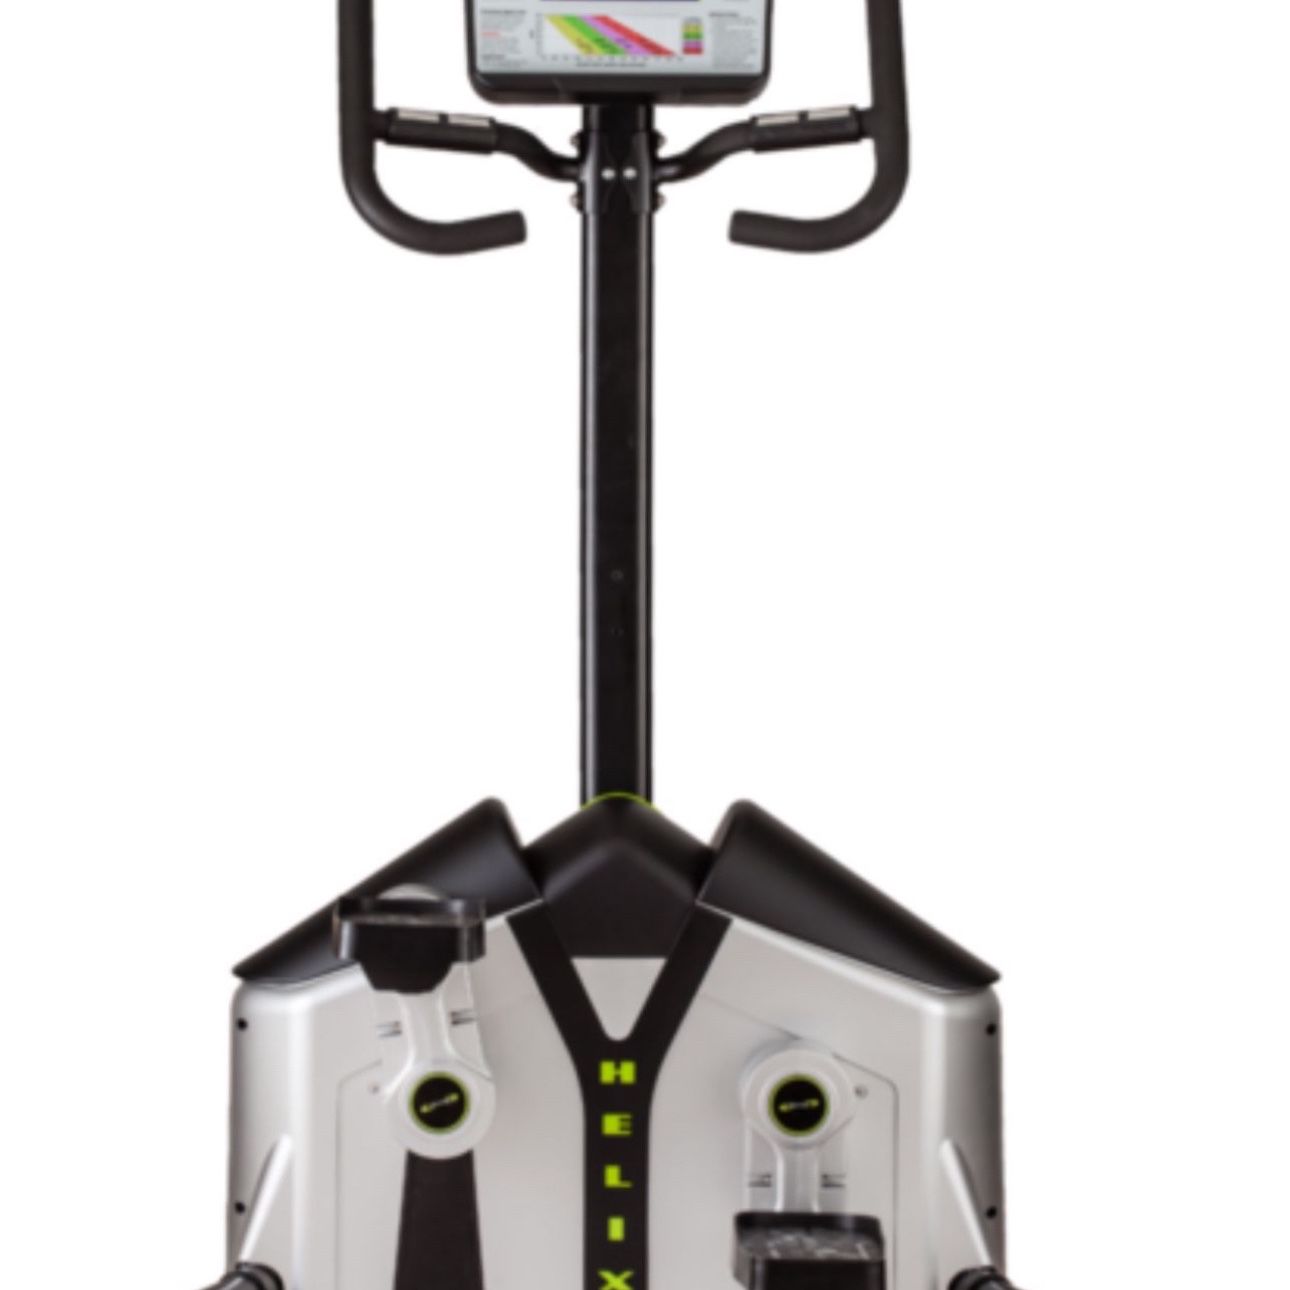 HELIX H1000 DIGITAL ESSENTIAL LATERAL TRAINER